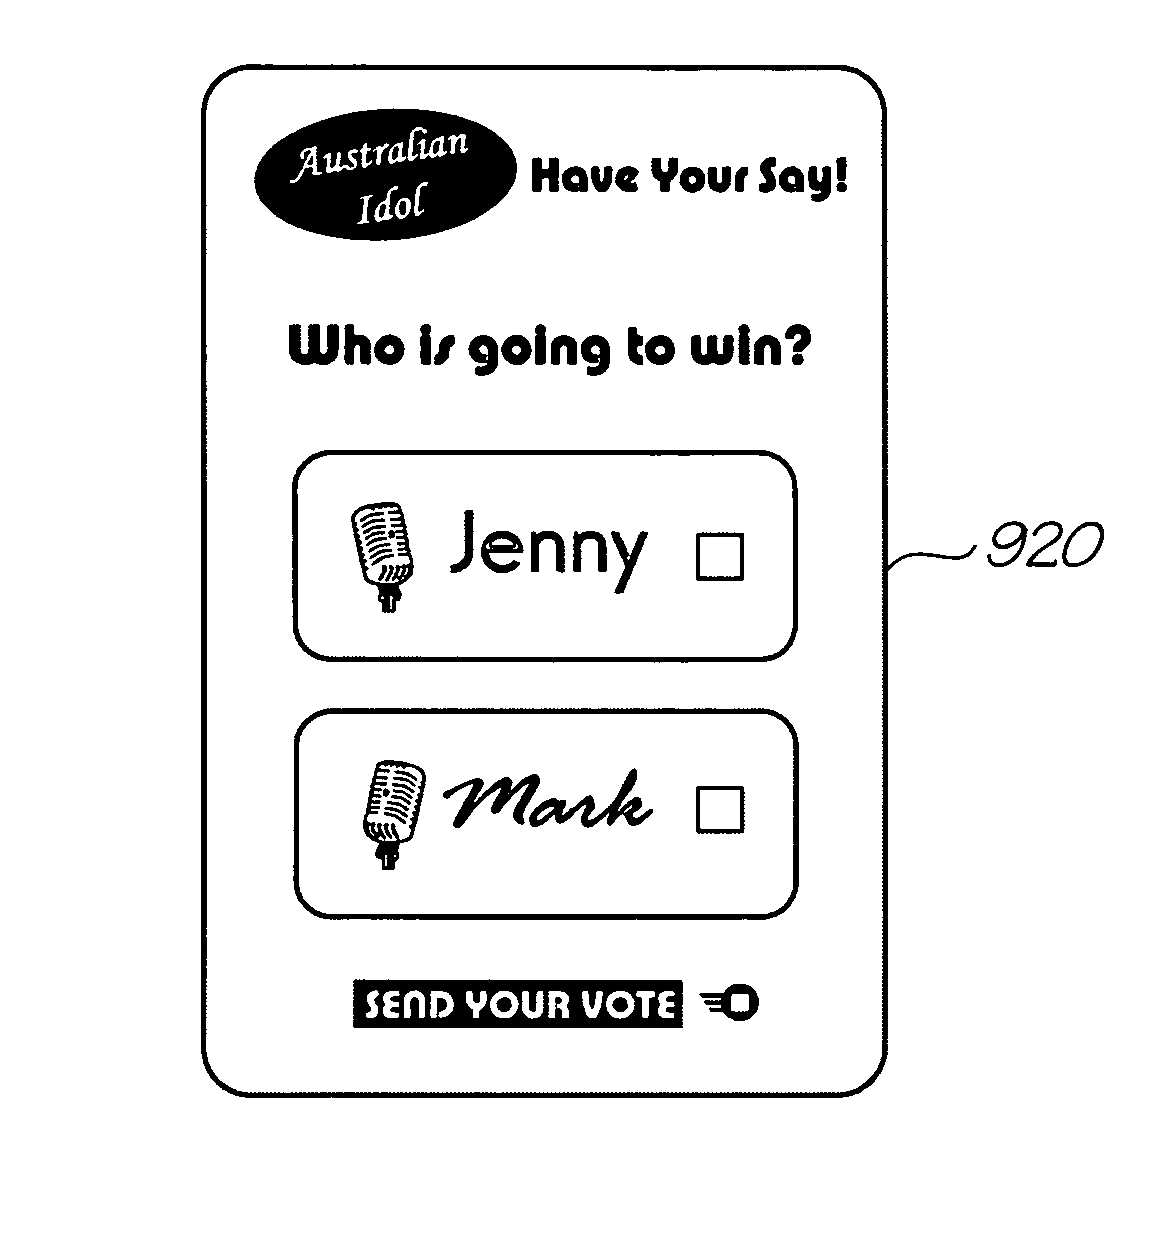 Printing a competition entry form using a mobile device